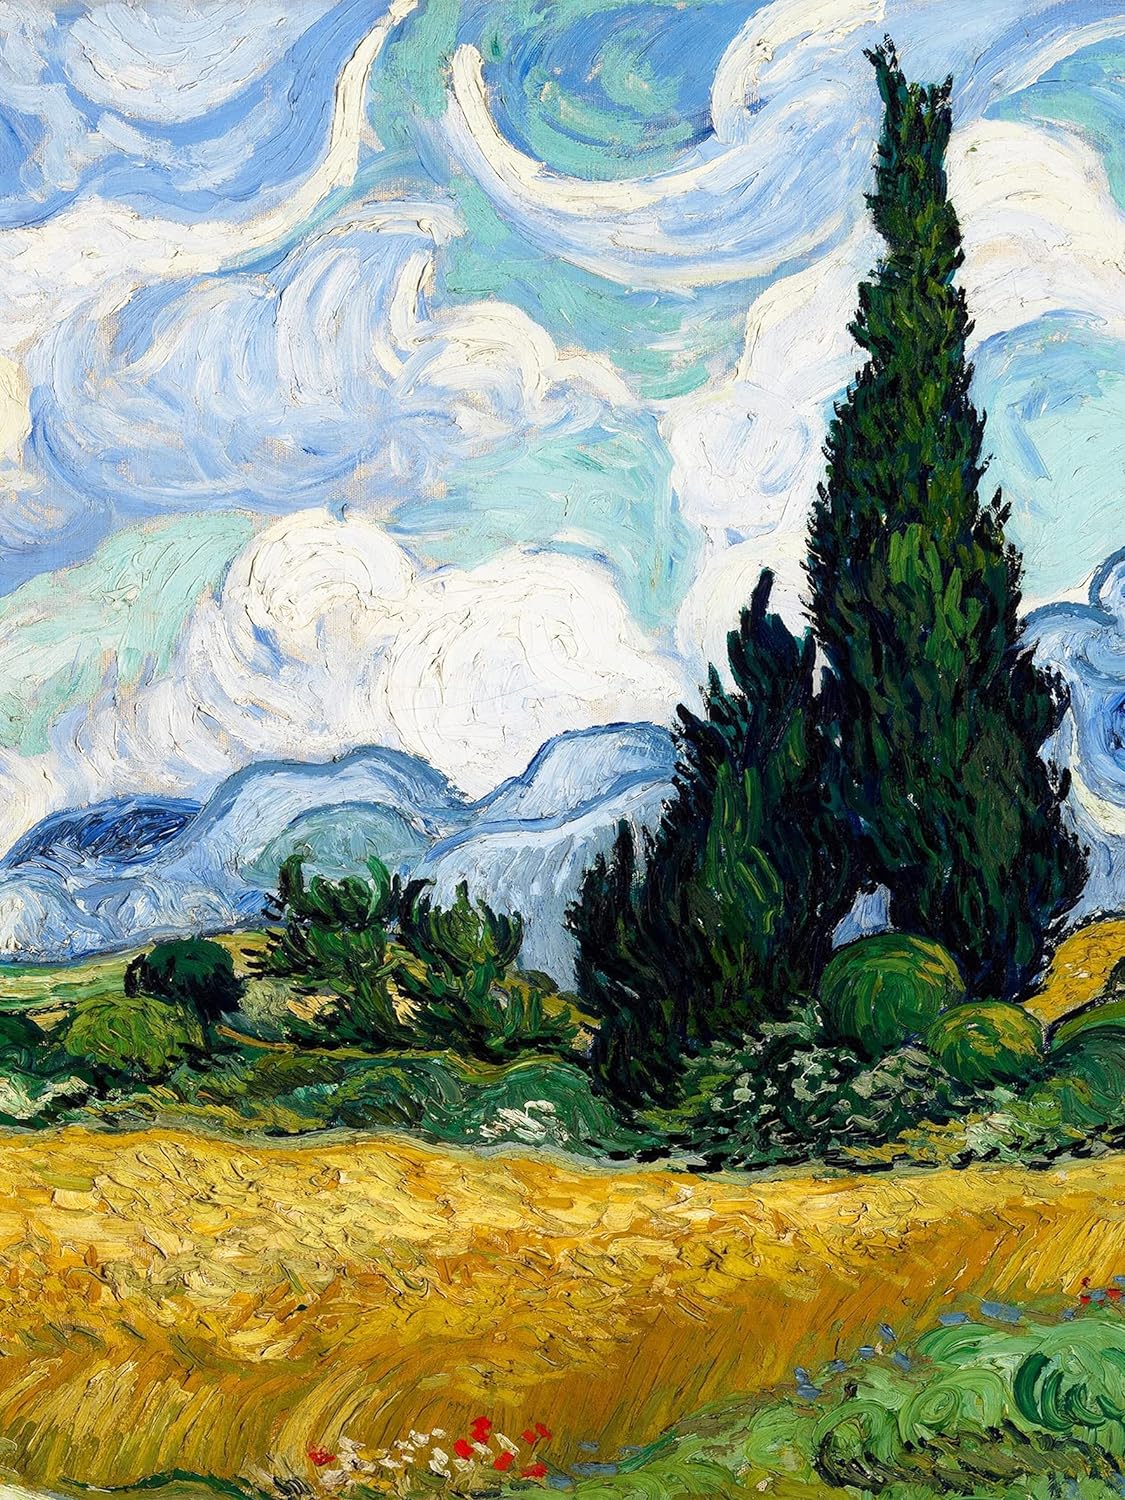 Jenesaisquoi Canvas Wall Art Famous Oil Paintings, Wheat Field with Cypresses Van Gogh Art Prints, Van Gogh Artwork Famous Art Posters Ready To Hang for Living Room, Bedroom, Office ( Unframed, 12 x